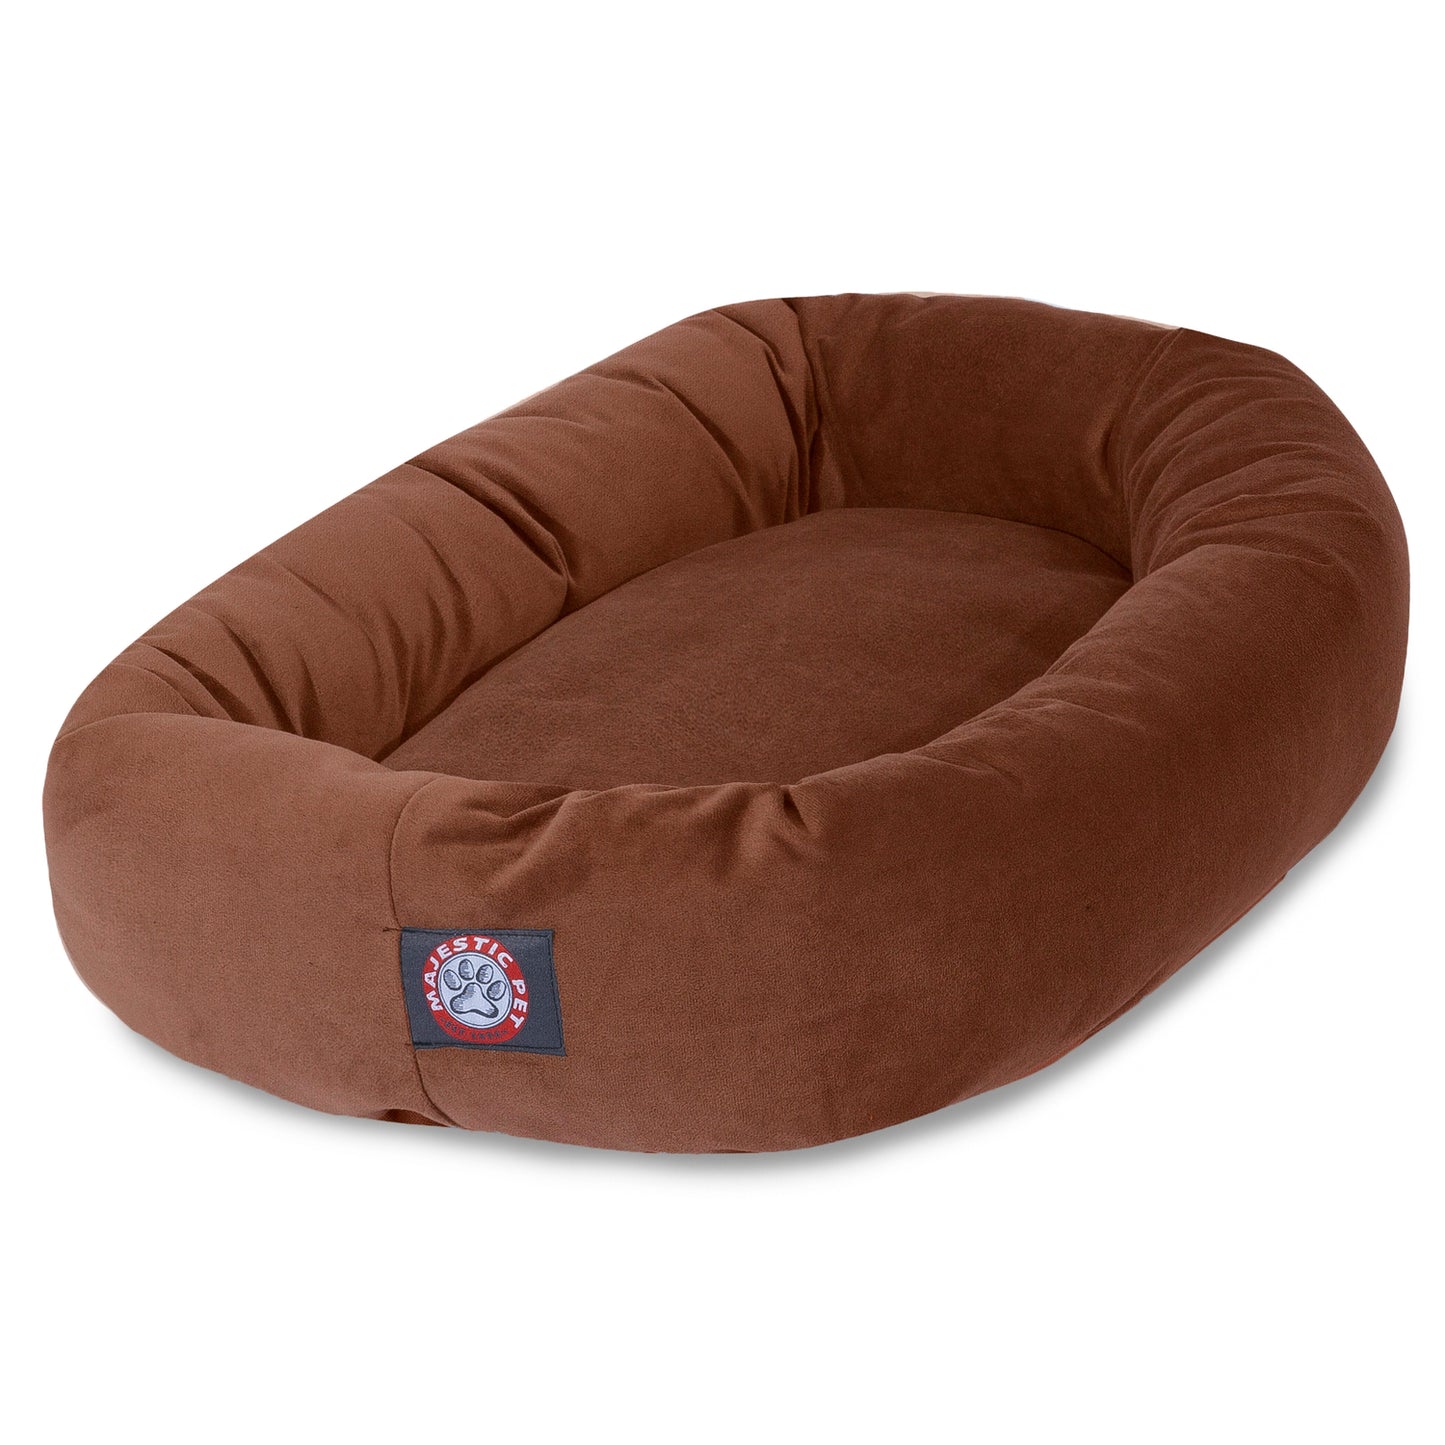 Majestic Pet Suede Bagel Dog Bed Machine Washable Chocolate Large 40" X 29" X 9"